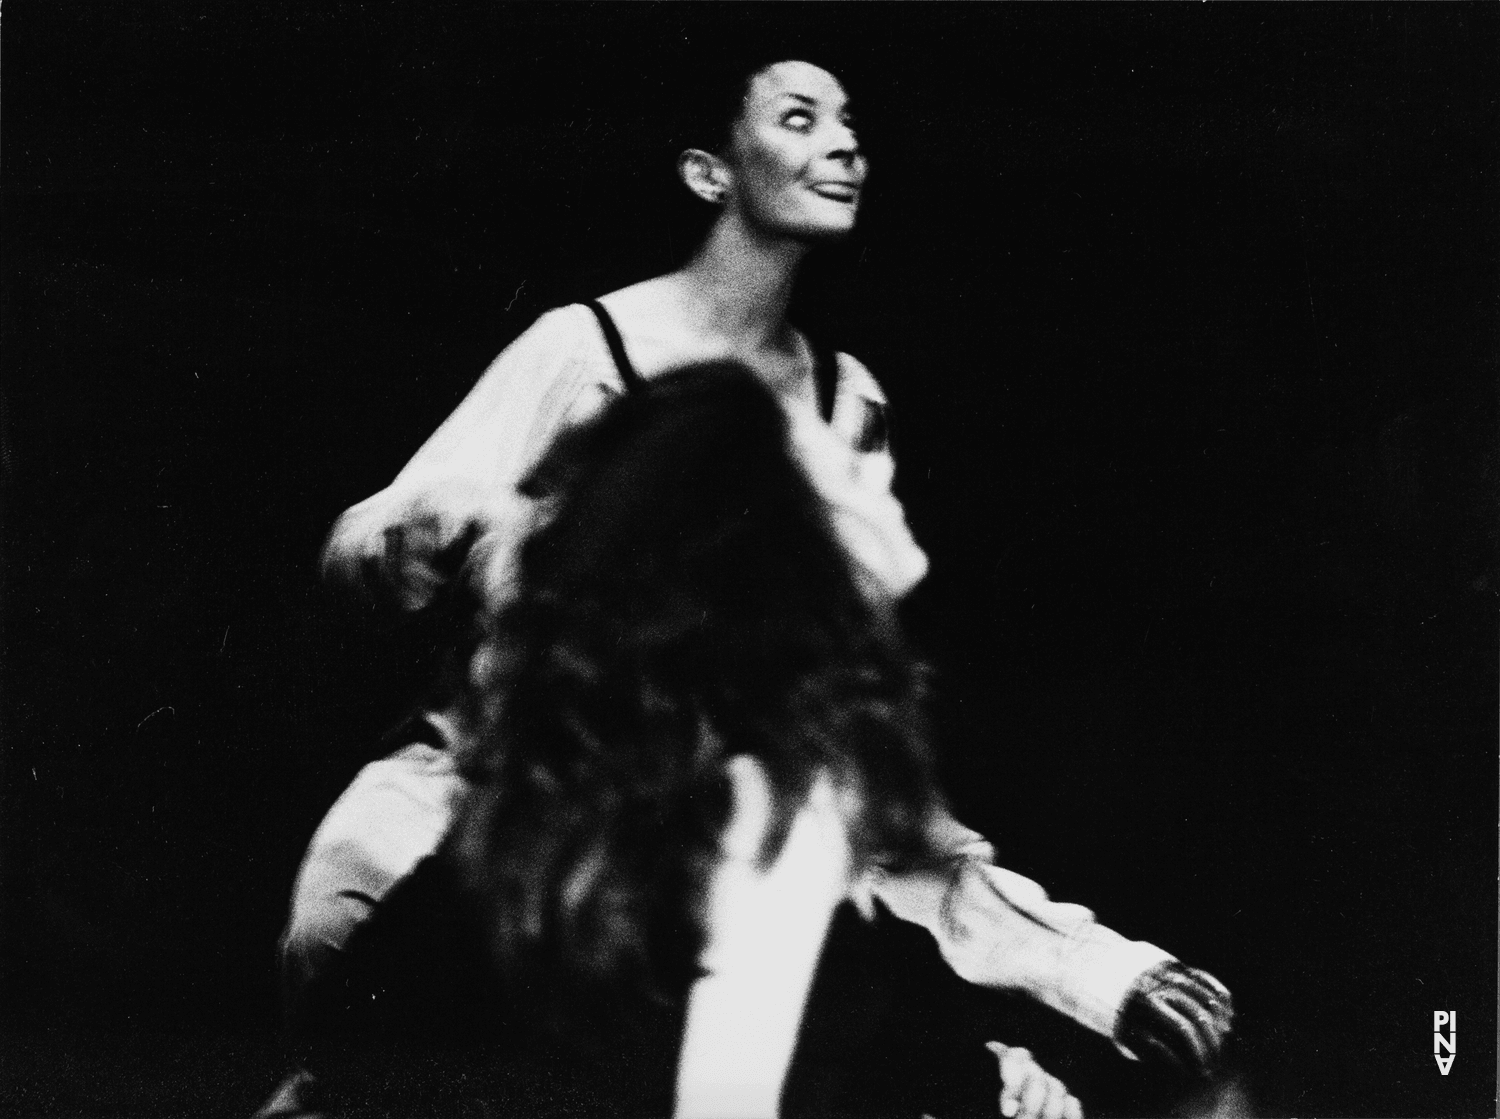 Catherine Denisot and Malou Airaudo in “Fritz” by Pina Bausch